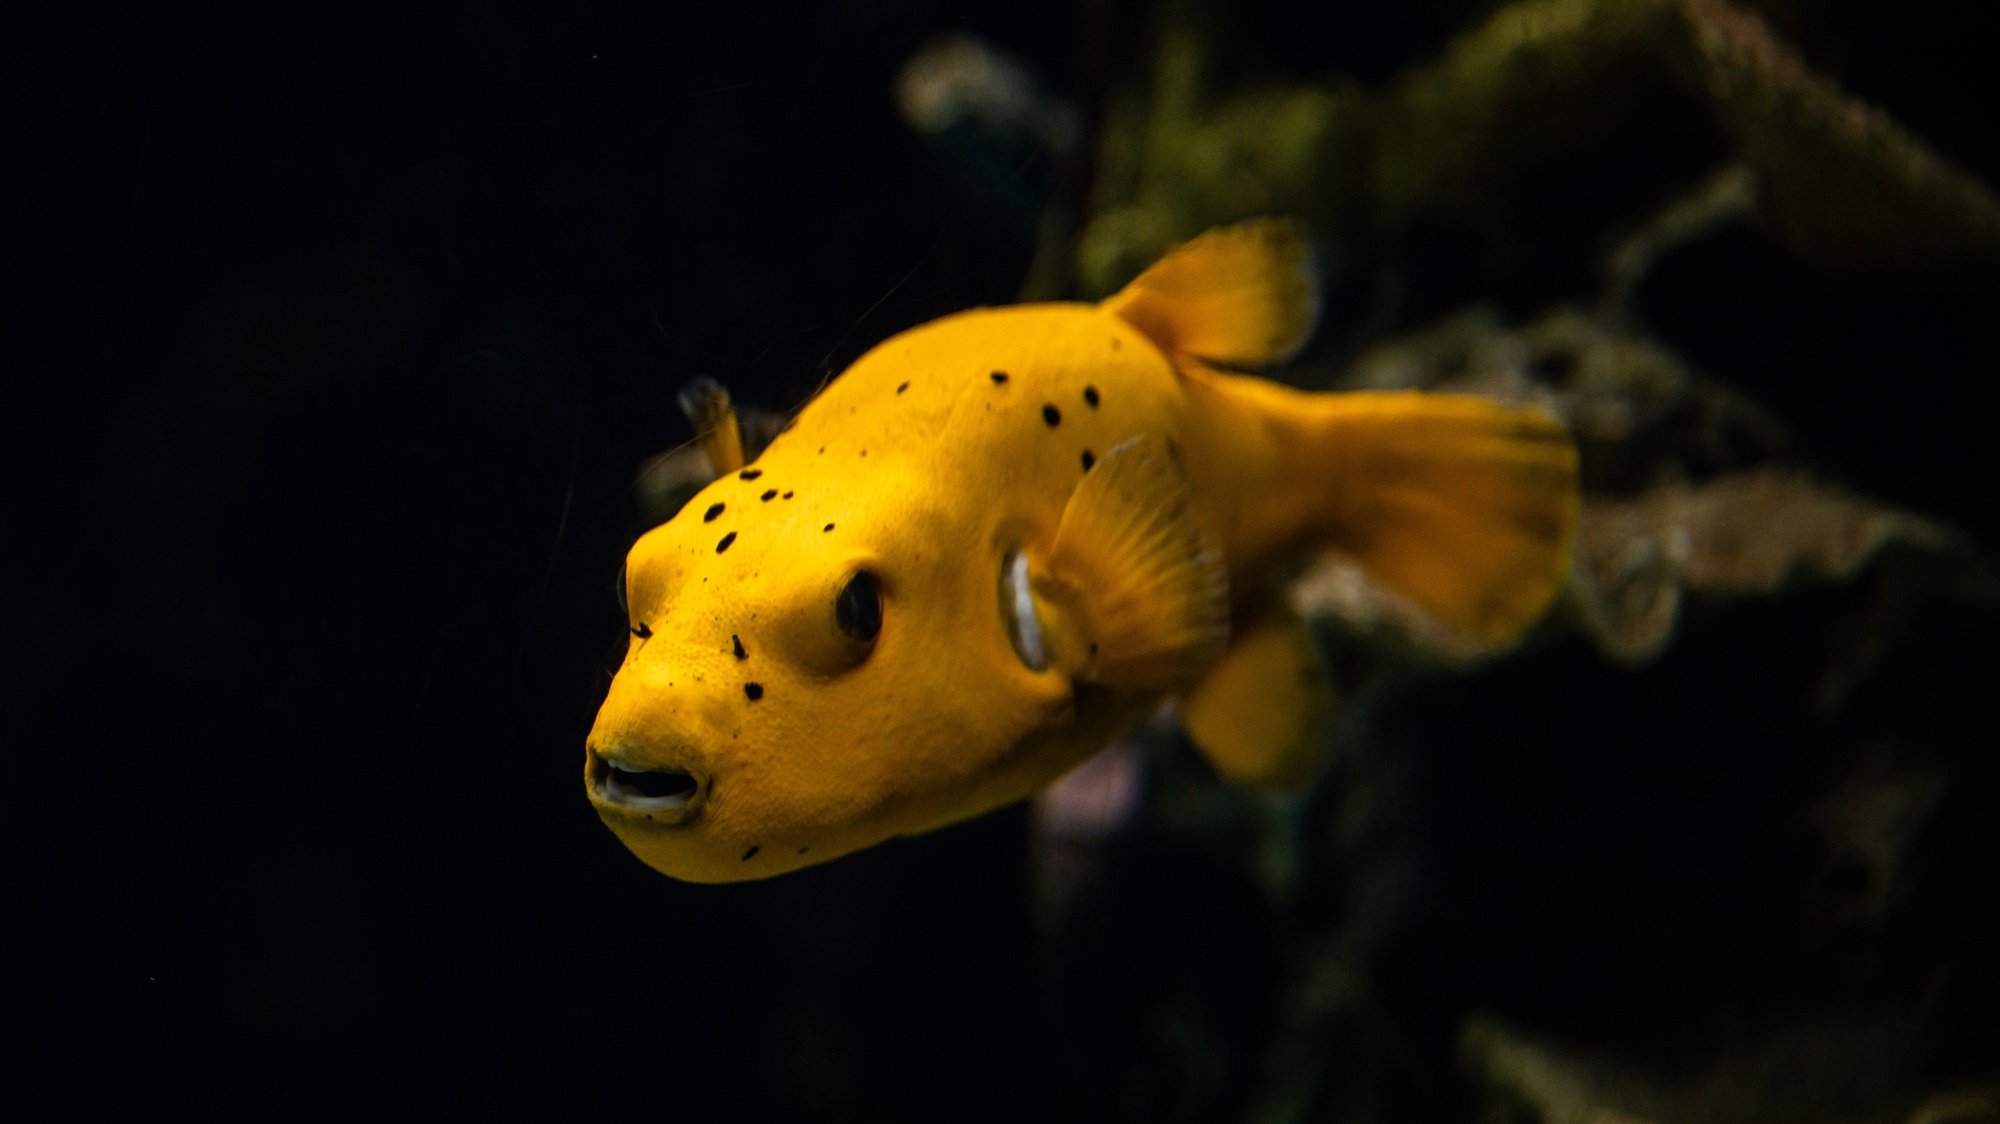 A puffer fish swims in a tank at the Lisbon Oceanarium, one of the biggest in the world, with one million visits per year,  located next to the venue where the UN Ocean Conference is taking place in Lisbon, Portugal, 29 June 2022. JOSE SENA GOULAO/LUSA